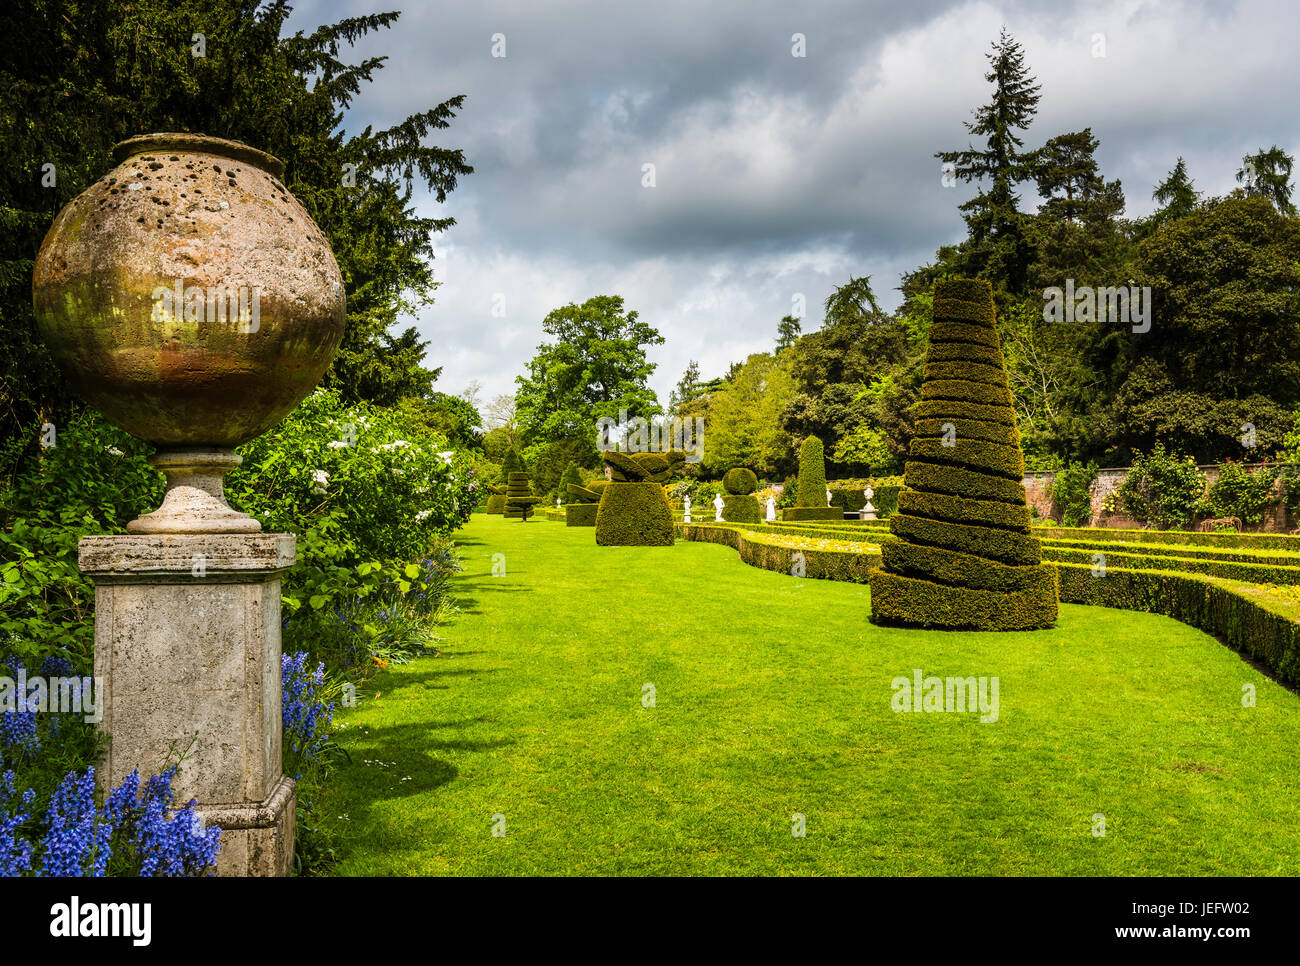 Topiary in the gardens at Cliveden, Buckinghamshire, UK Stock Photo